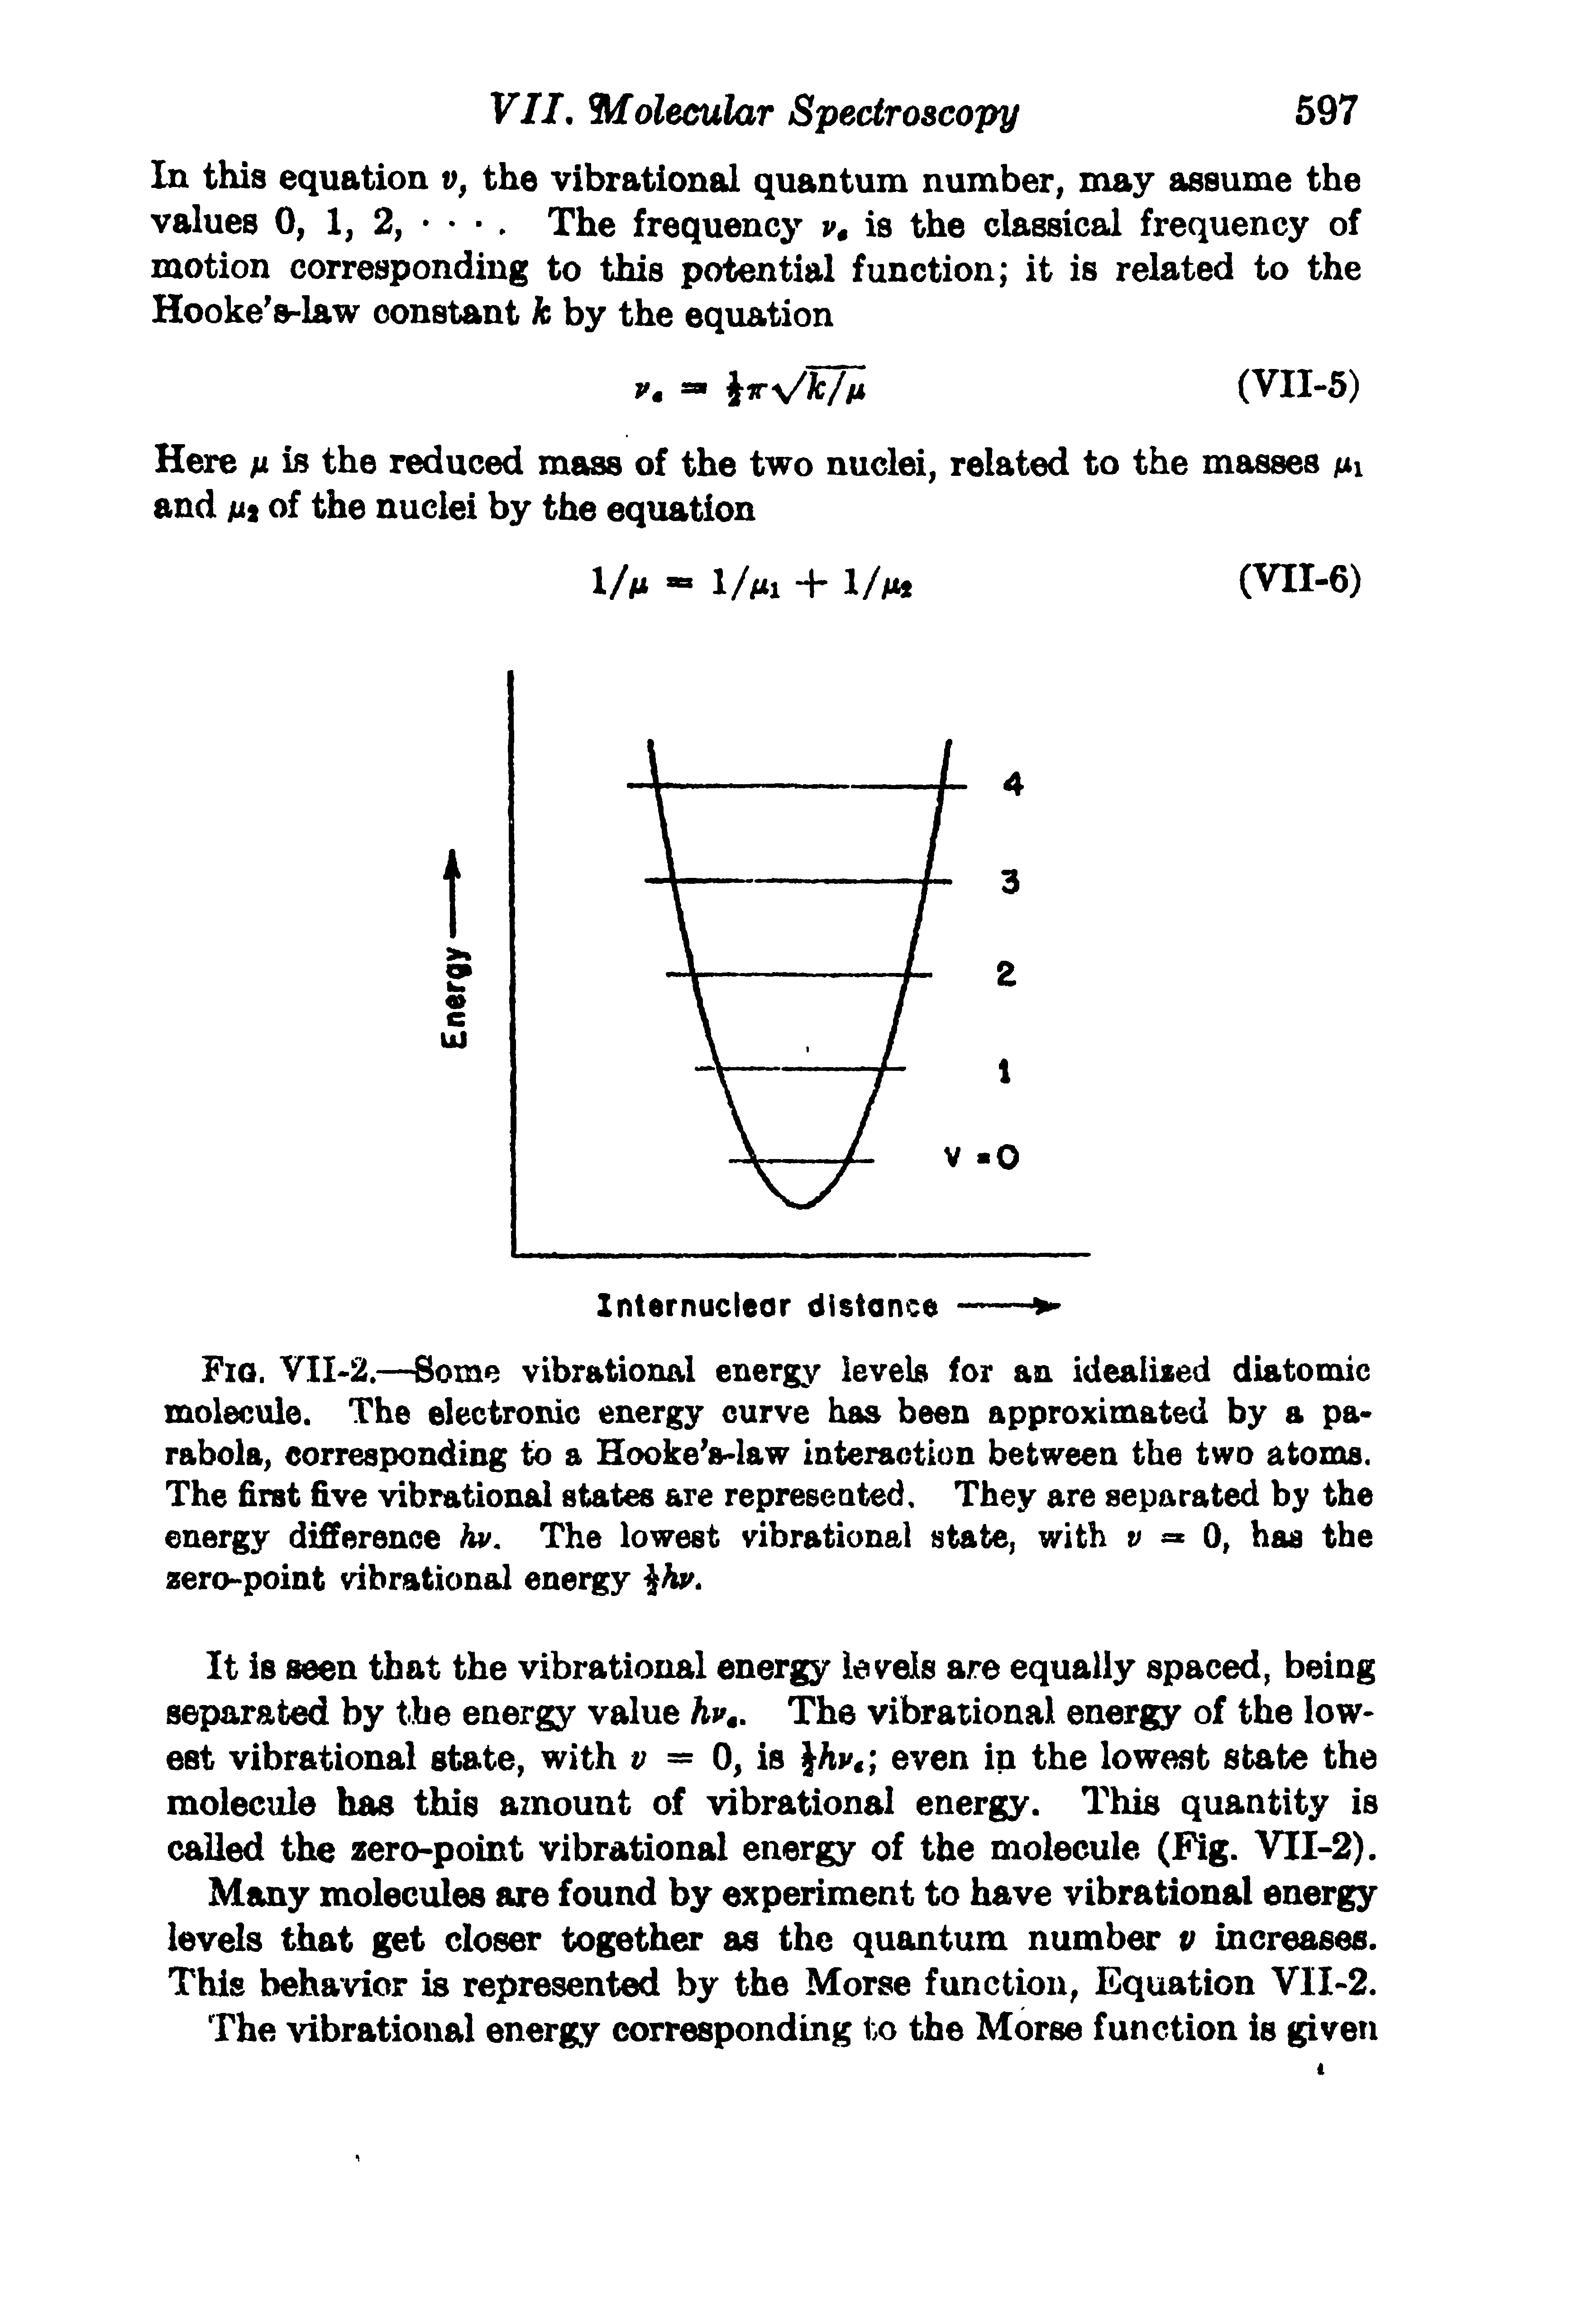 Fig. VII-2.—Some vibrational energy levels for an idealised diatomic molecule. The electronic energy curve has been approximated by a parabola, corresponding to a Qooke s-law interaction between the two atoms. The firat five vibrational states are represented. They are separated by the energy difference hv. The lowest vibrational state, with v 0, has the zero-point vibrational energy...